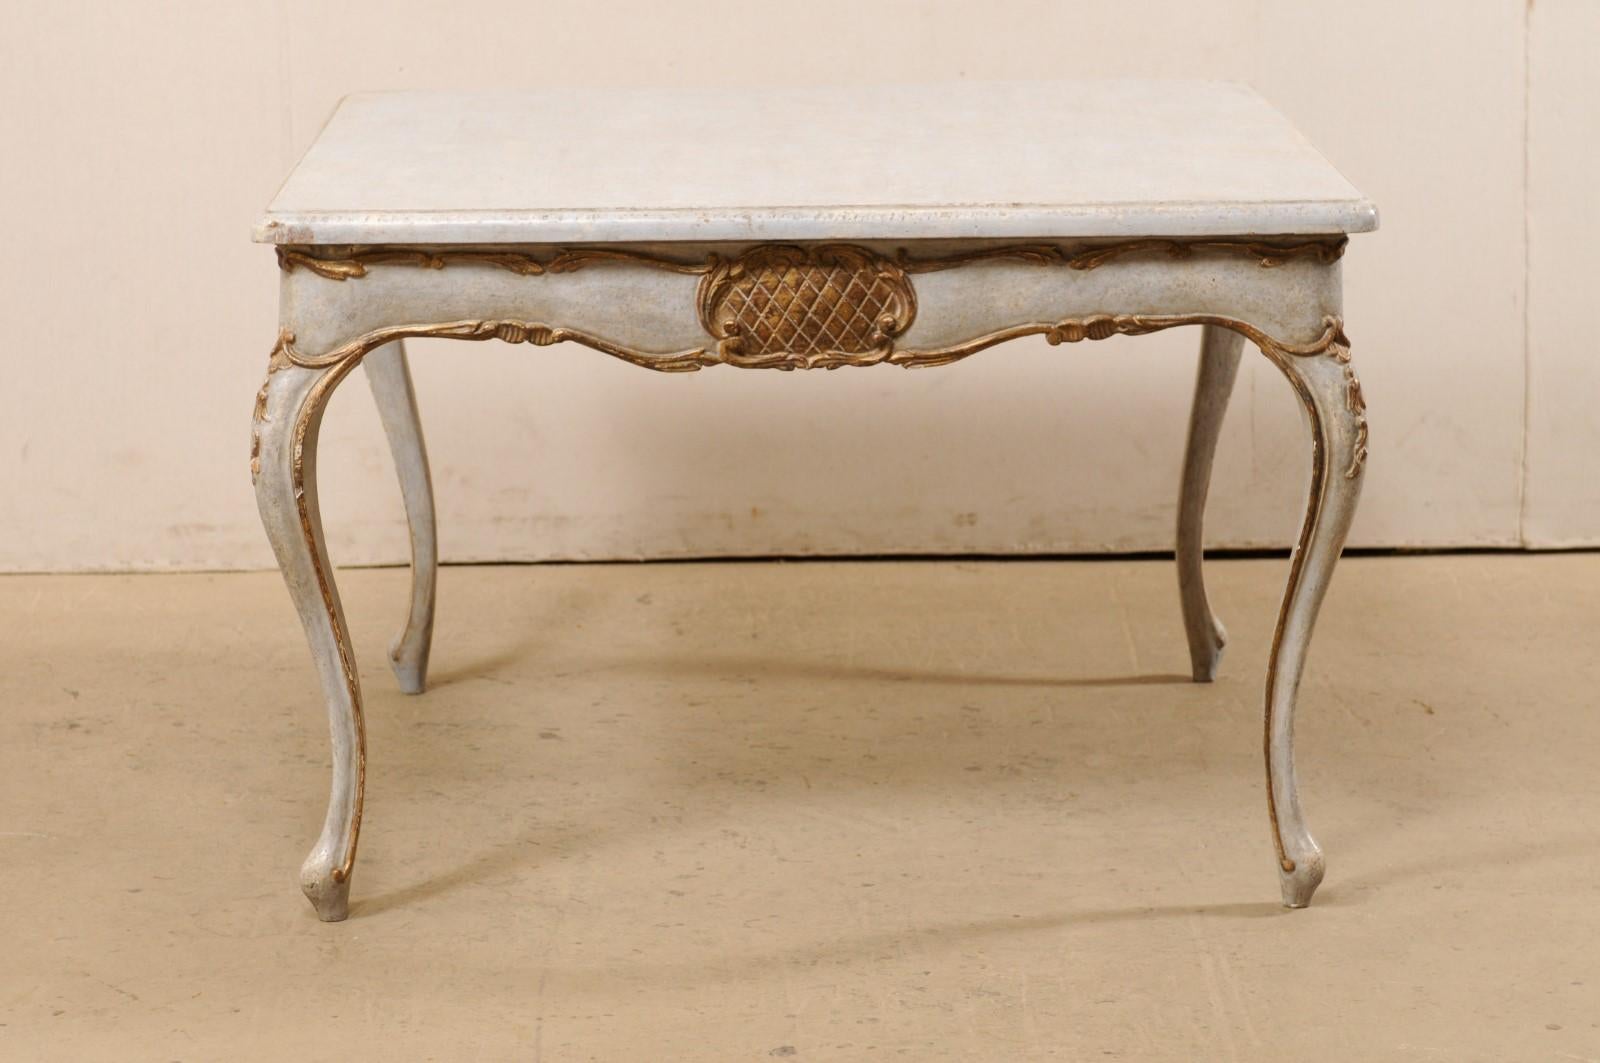 Italian Square-Shaped Wood Table w/ Elegant Legs, Scalloped Skirt & Gilt Accents For Sale 1